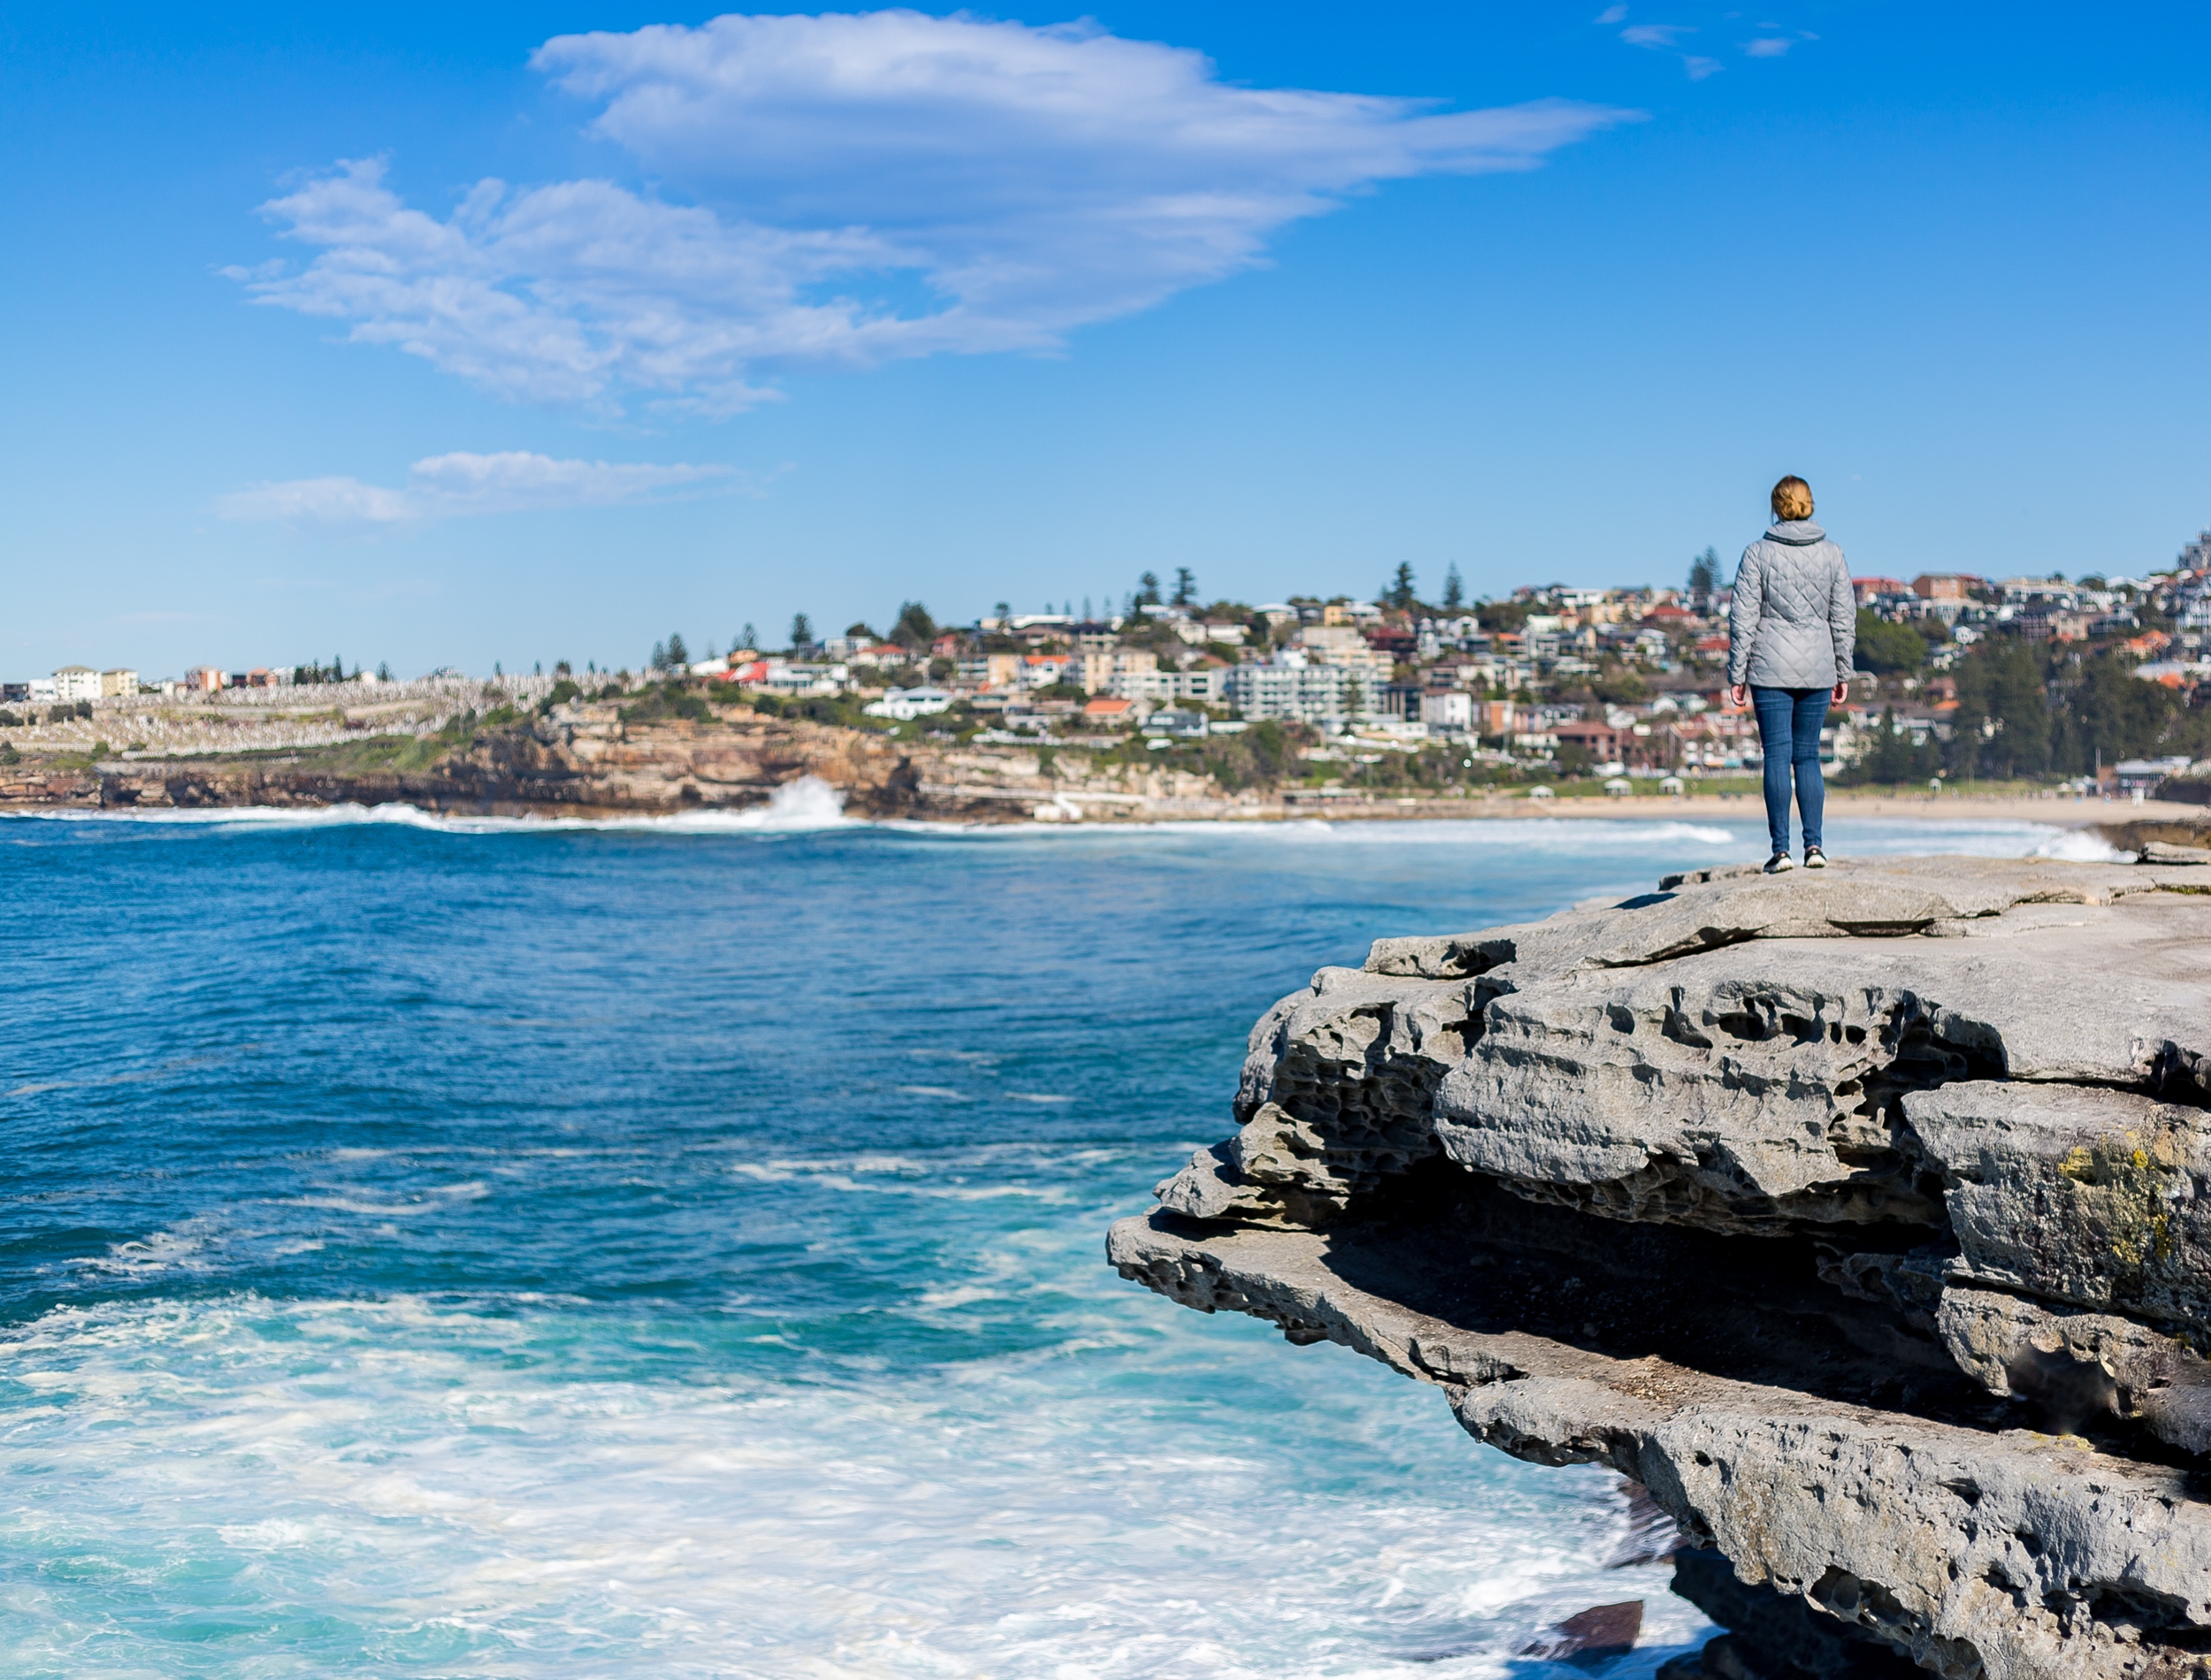 Cheap things to do in Sydney: Bondi to Coogee walk